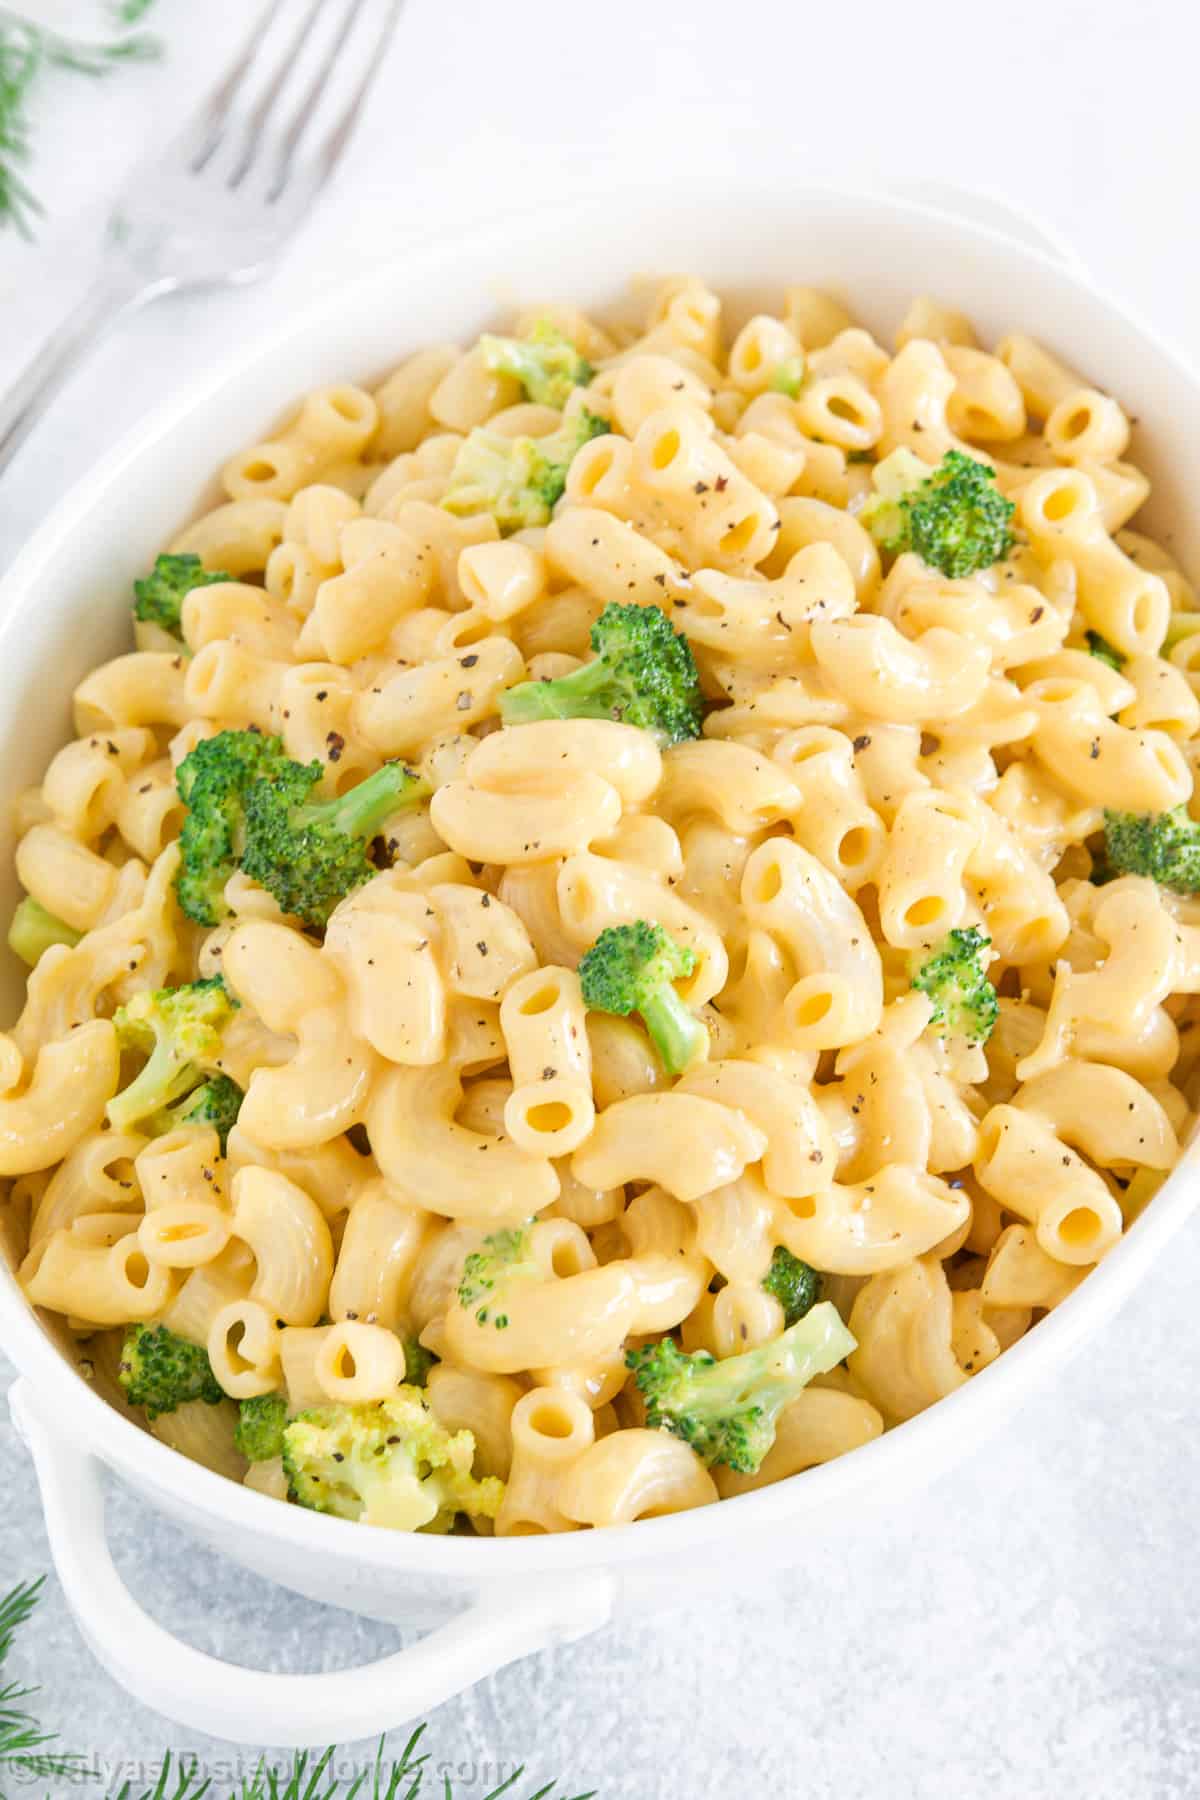 Broccoli Mac and Cheese is a delicious, comforting, and nutritious twist on a classic favorite.